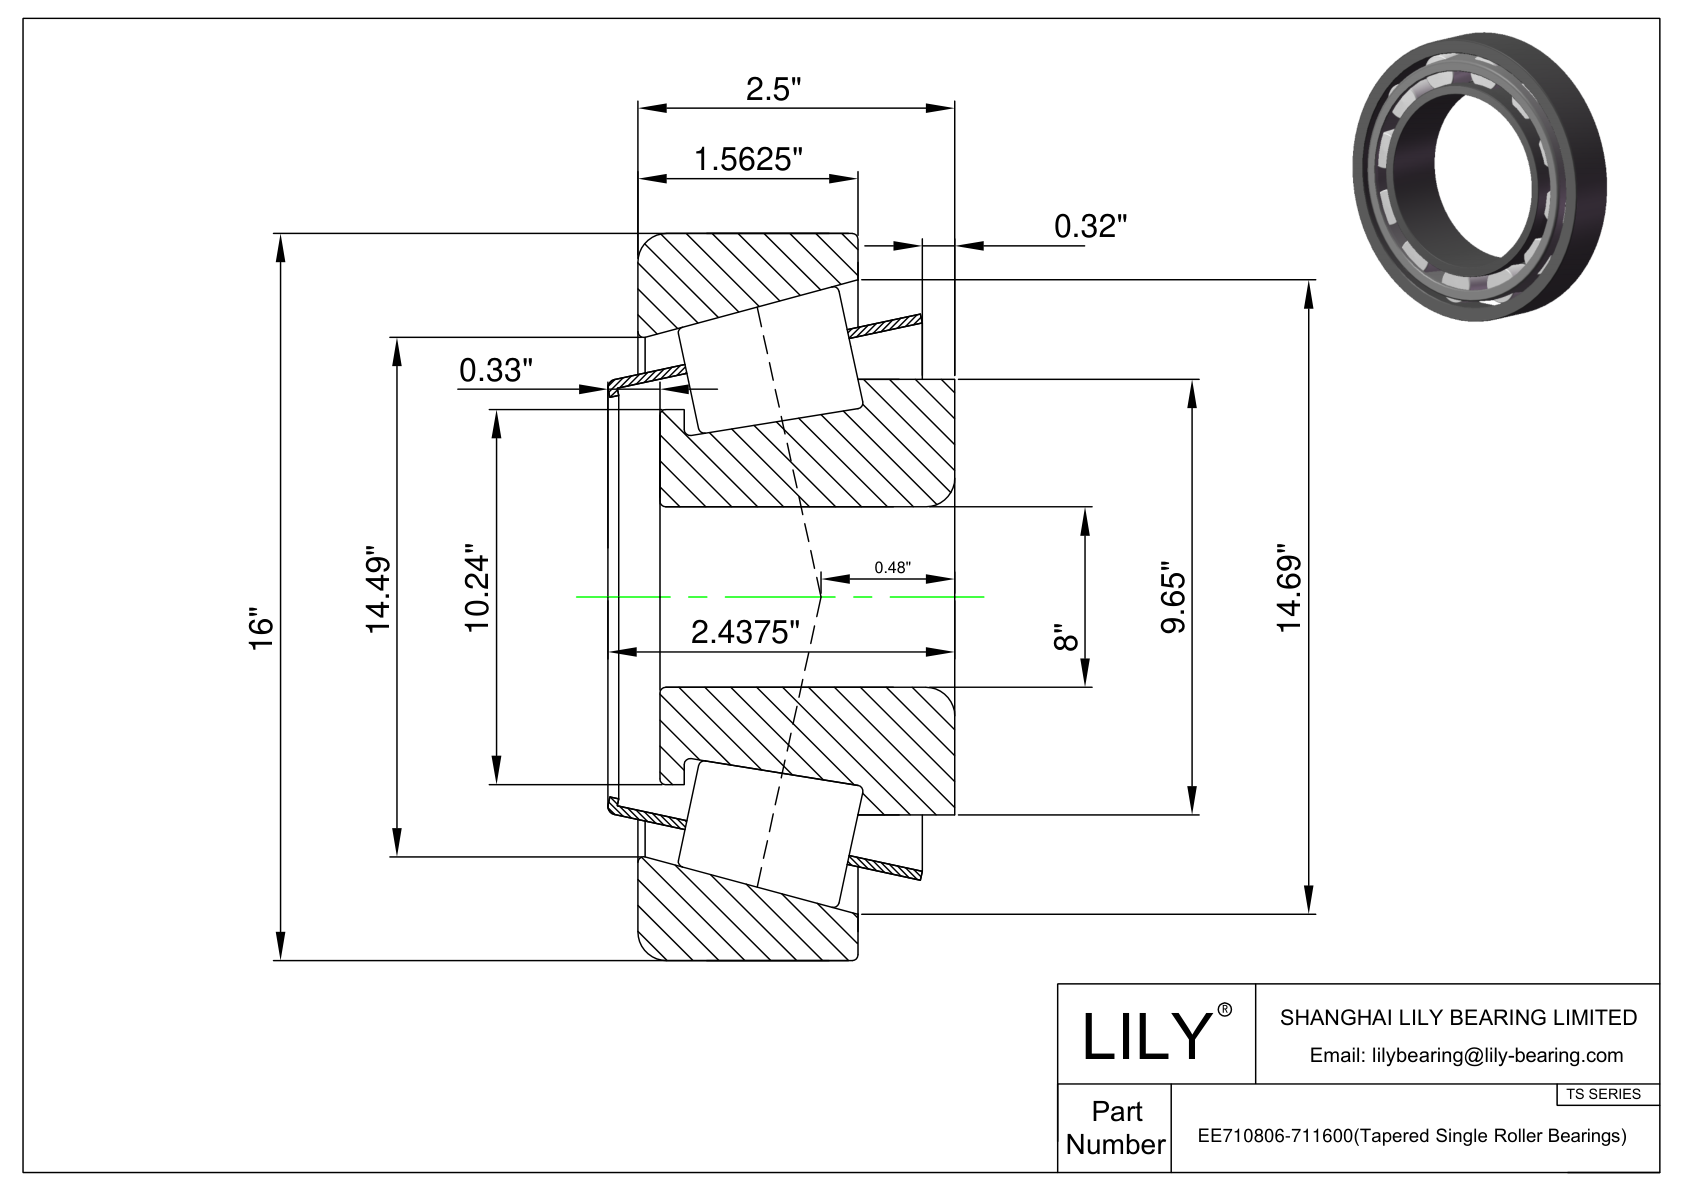 EE710806-711600 TS (Tapered Single Roller Bearings) (Imperial) cad drawing